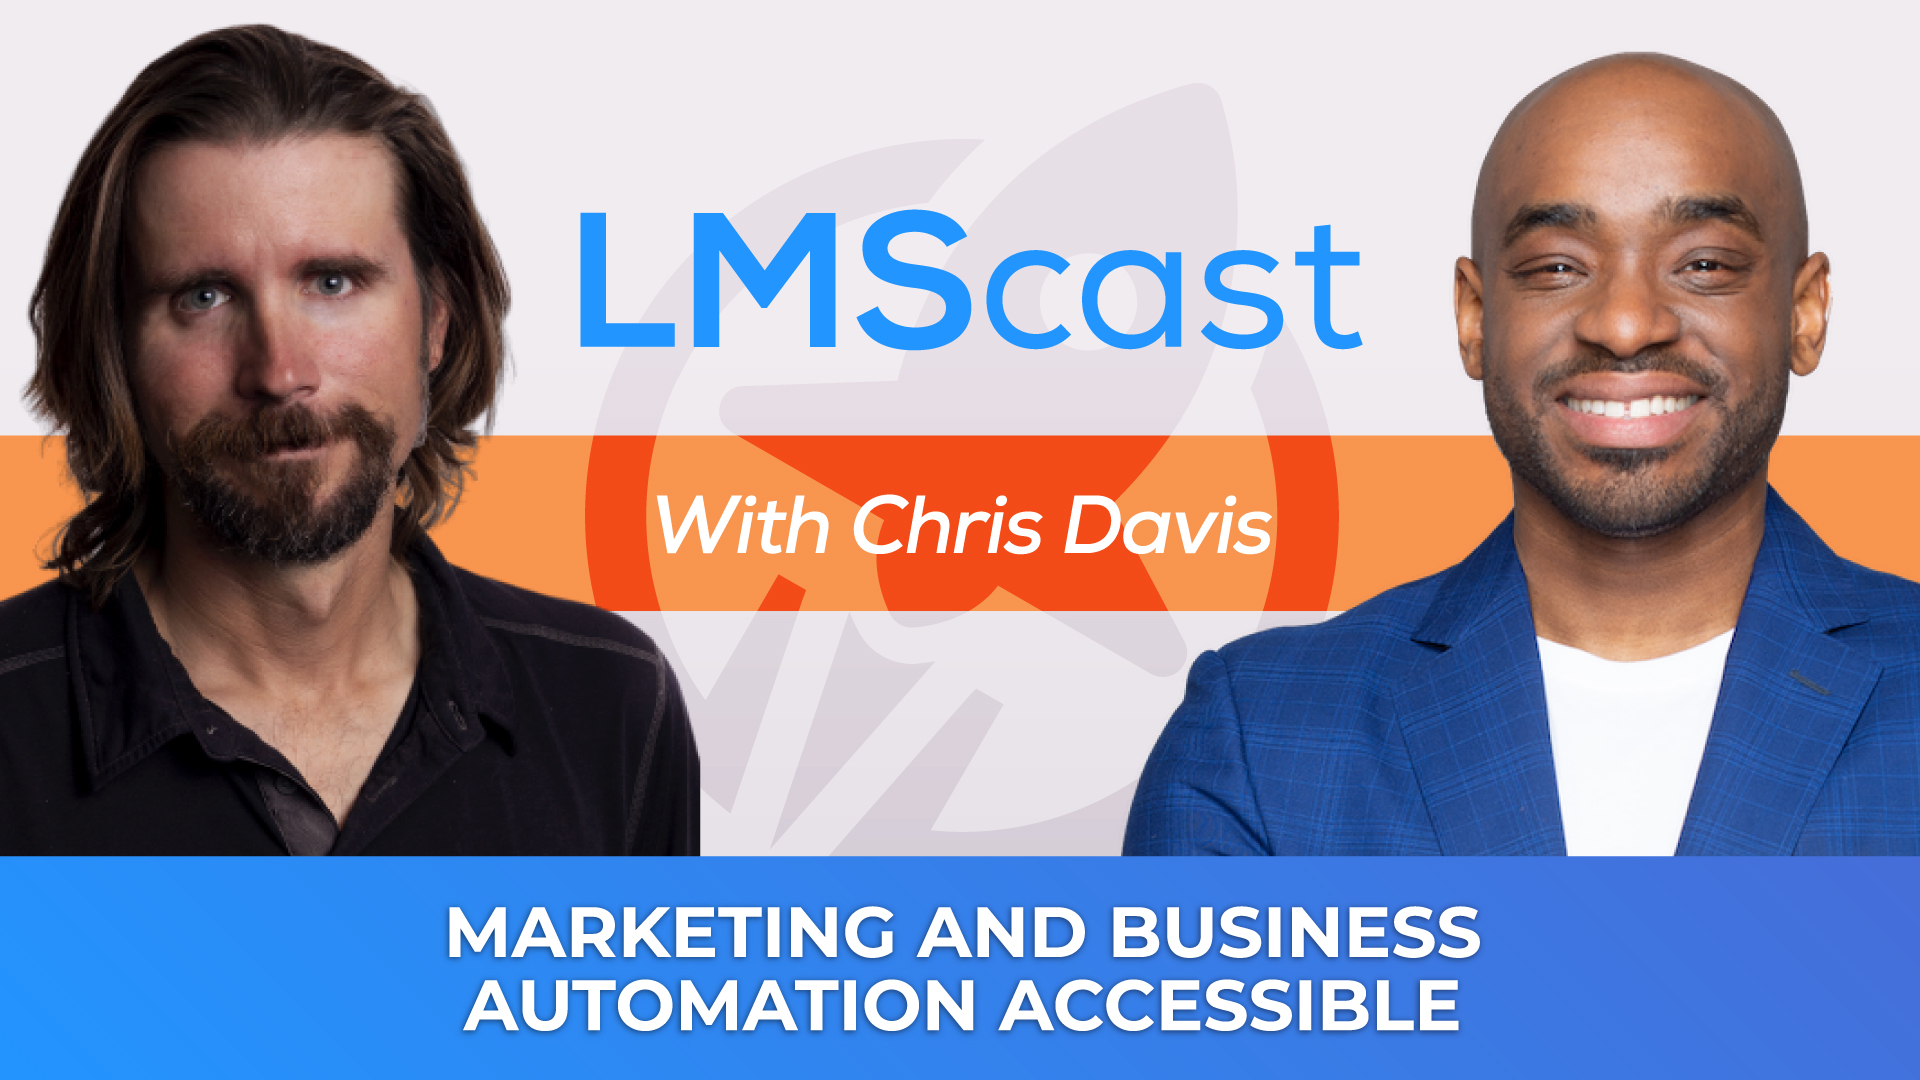 Chris Davis Makes Marketing and Business Automation Accessible